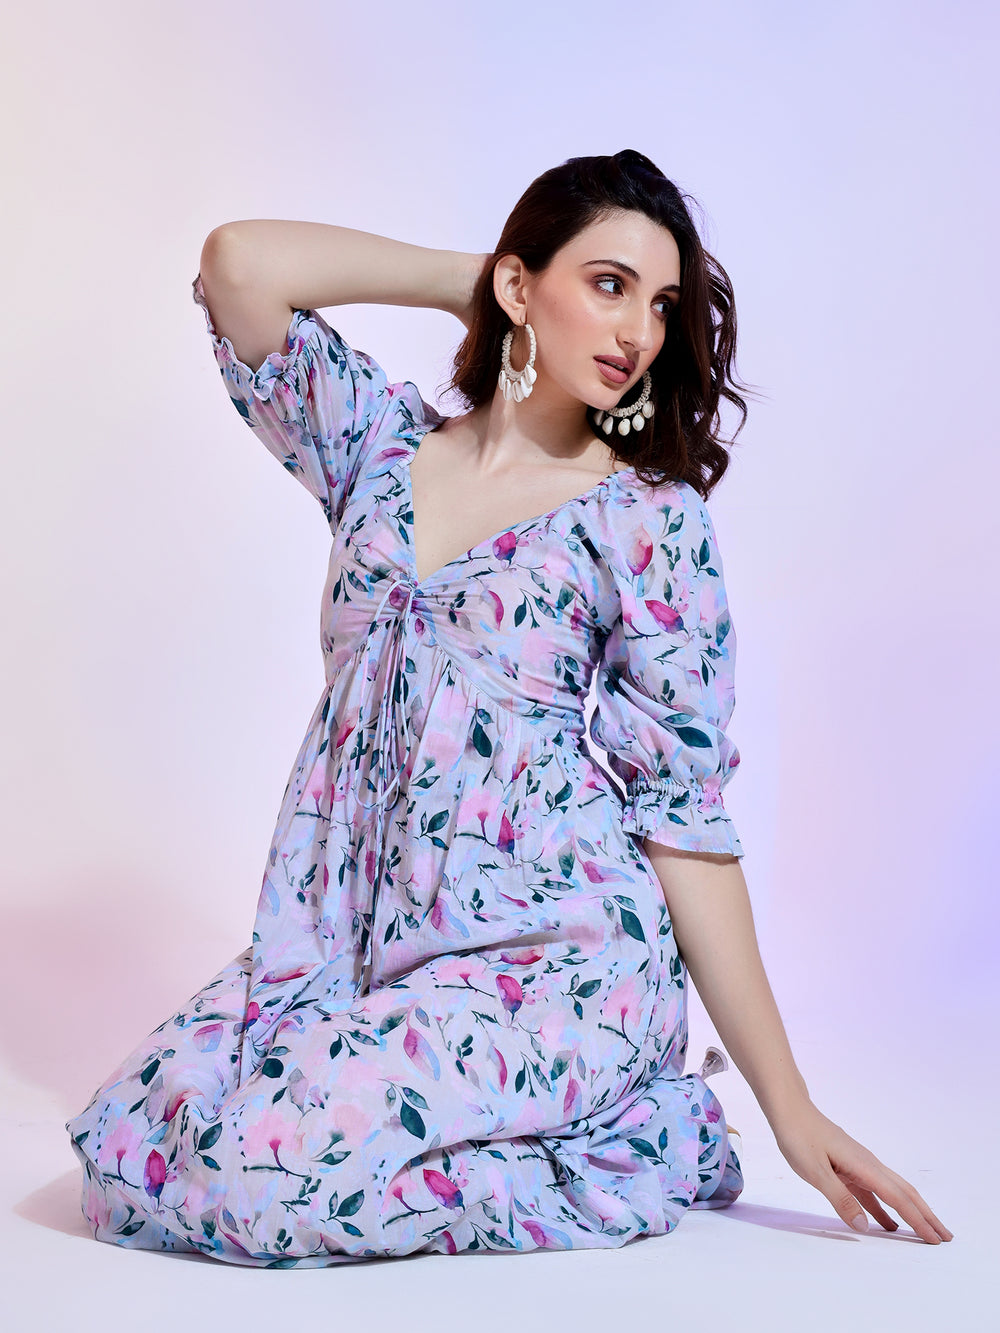 Floral dress with pink leaves